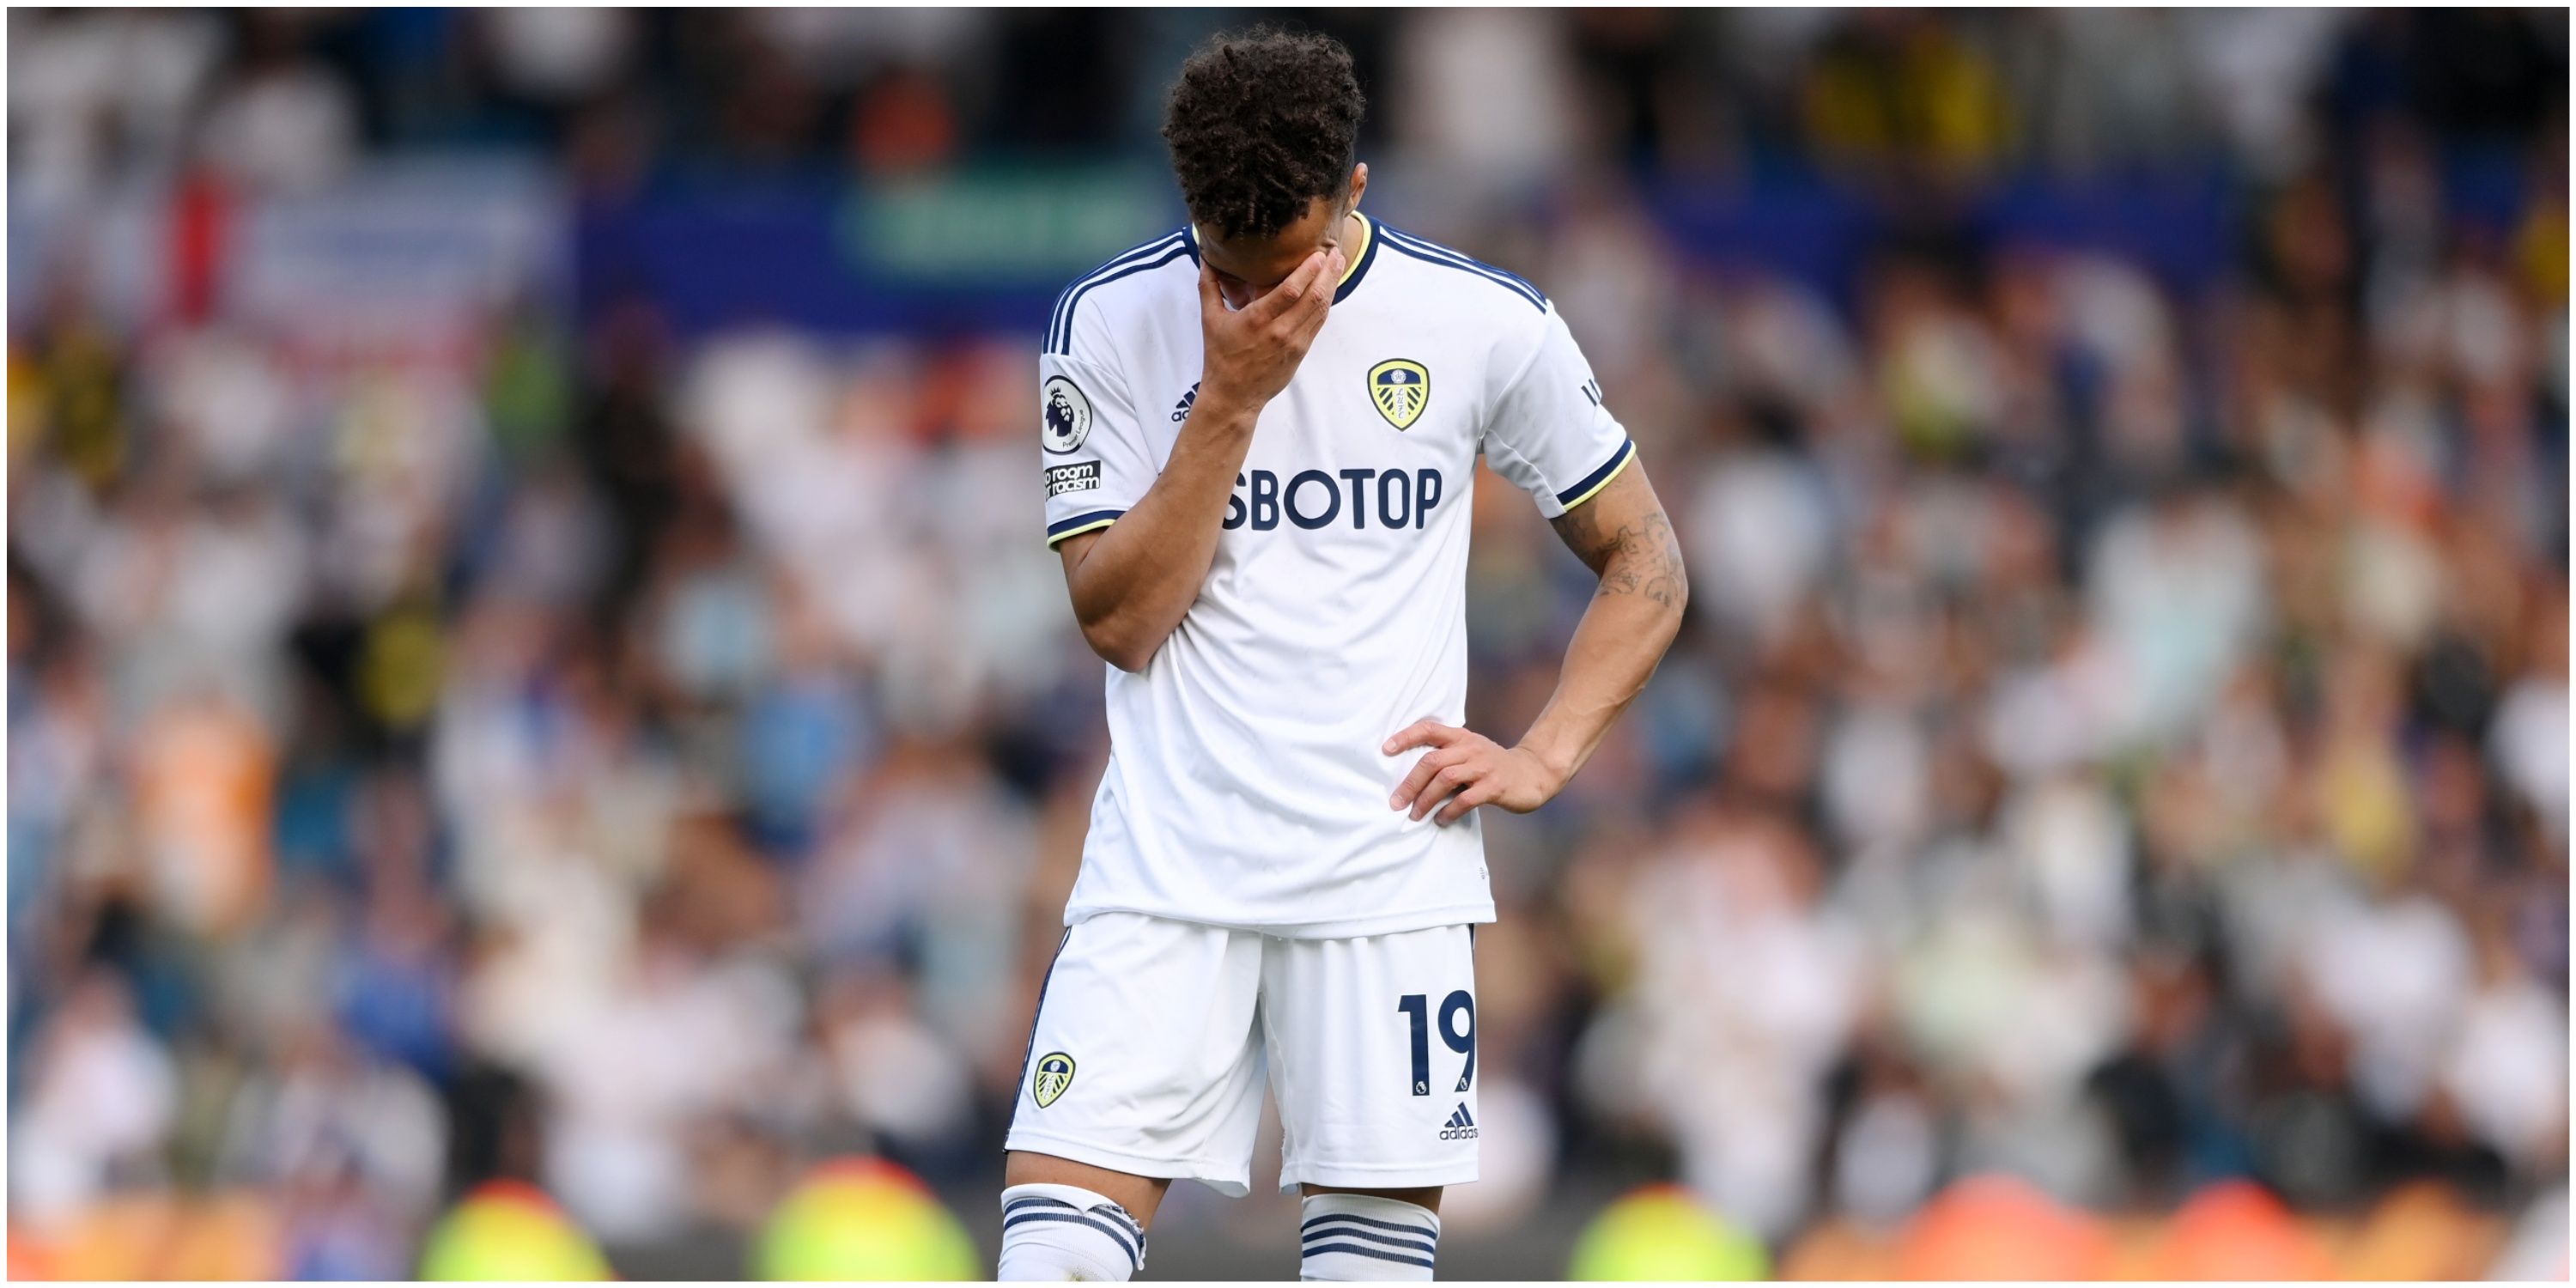 Rodrigo Moreno of Leeds United looks dejected after their relegation from the Premier League.